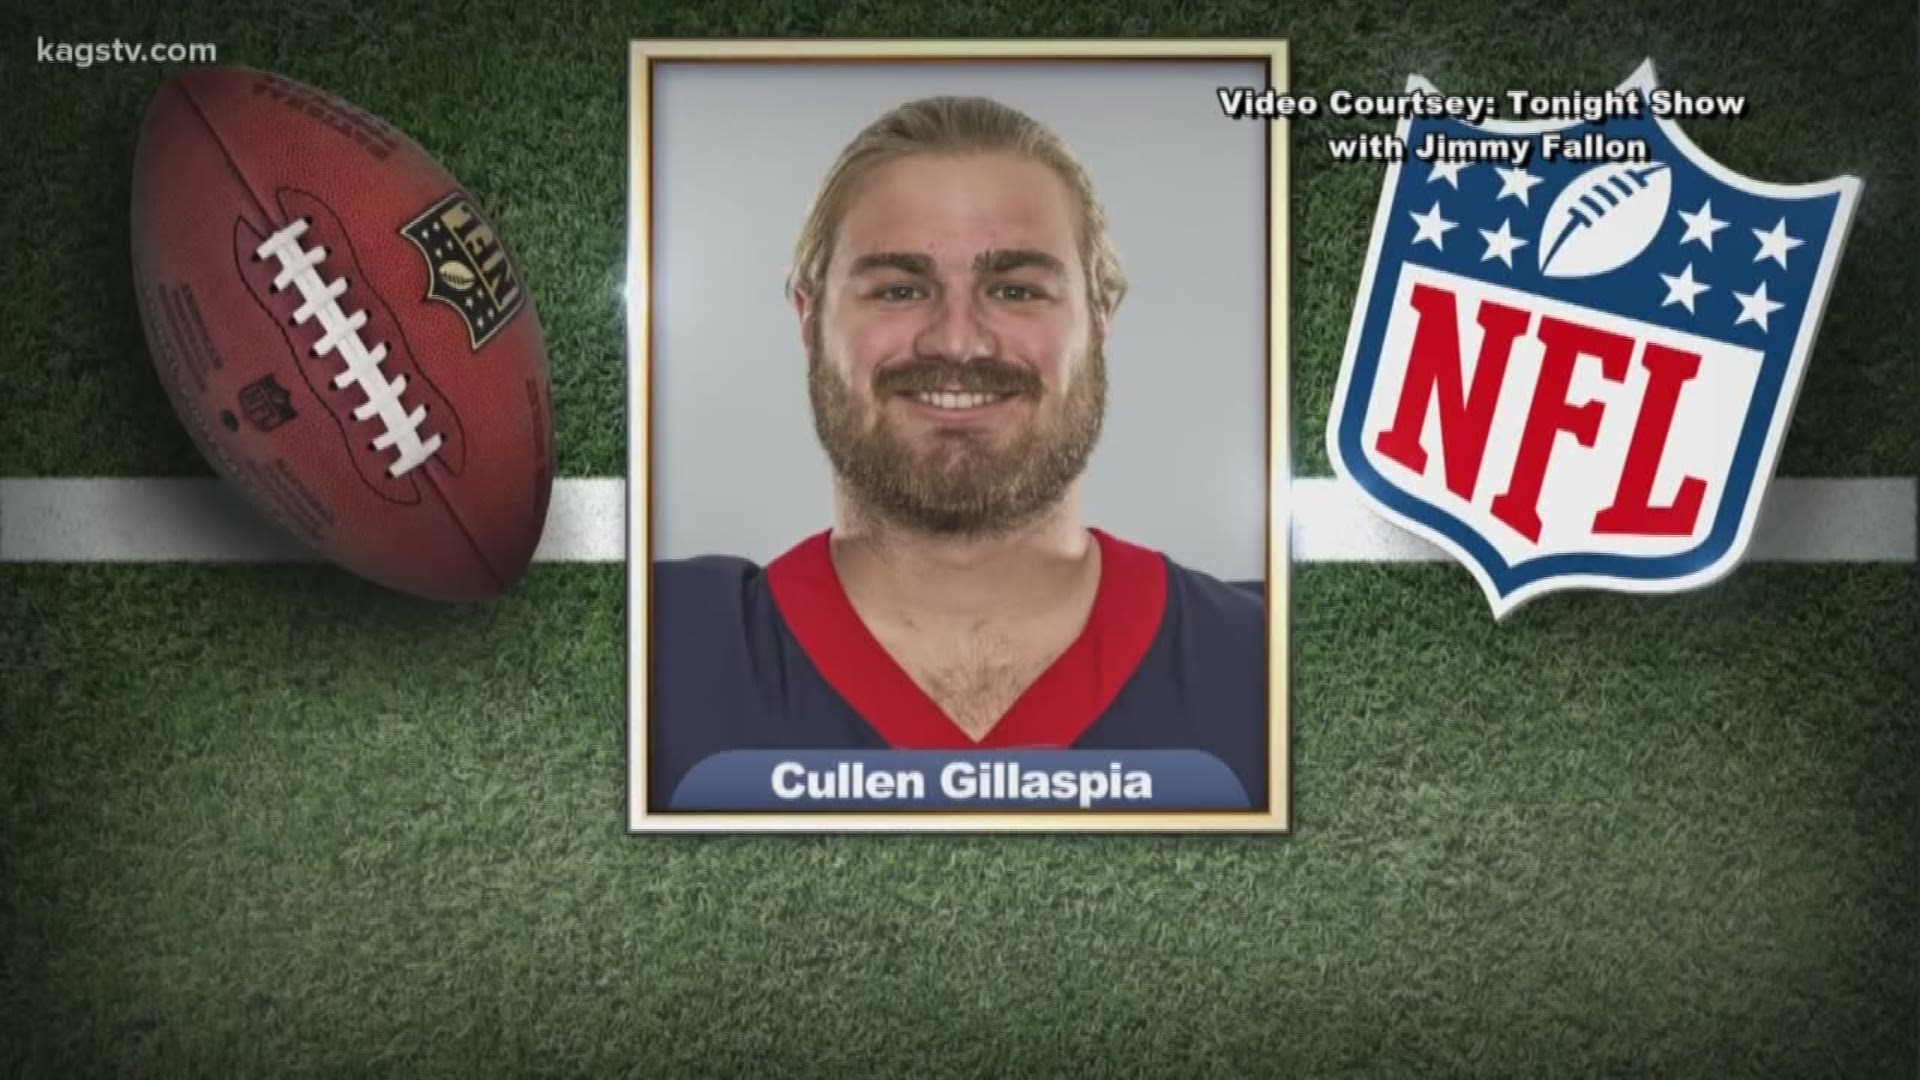 Former 12th Man, Cullen Gillaspia, got his very own shout-out from Jimmy Fallon during The Tonight Show with Jimmy Fallon.